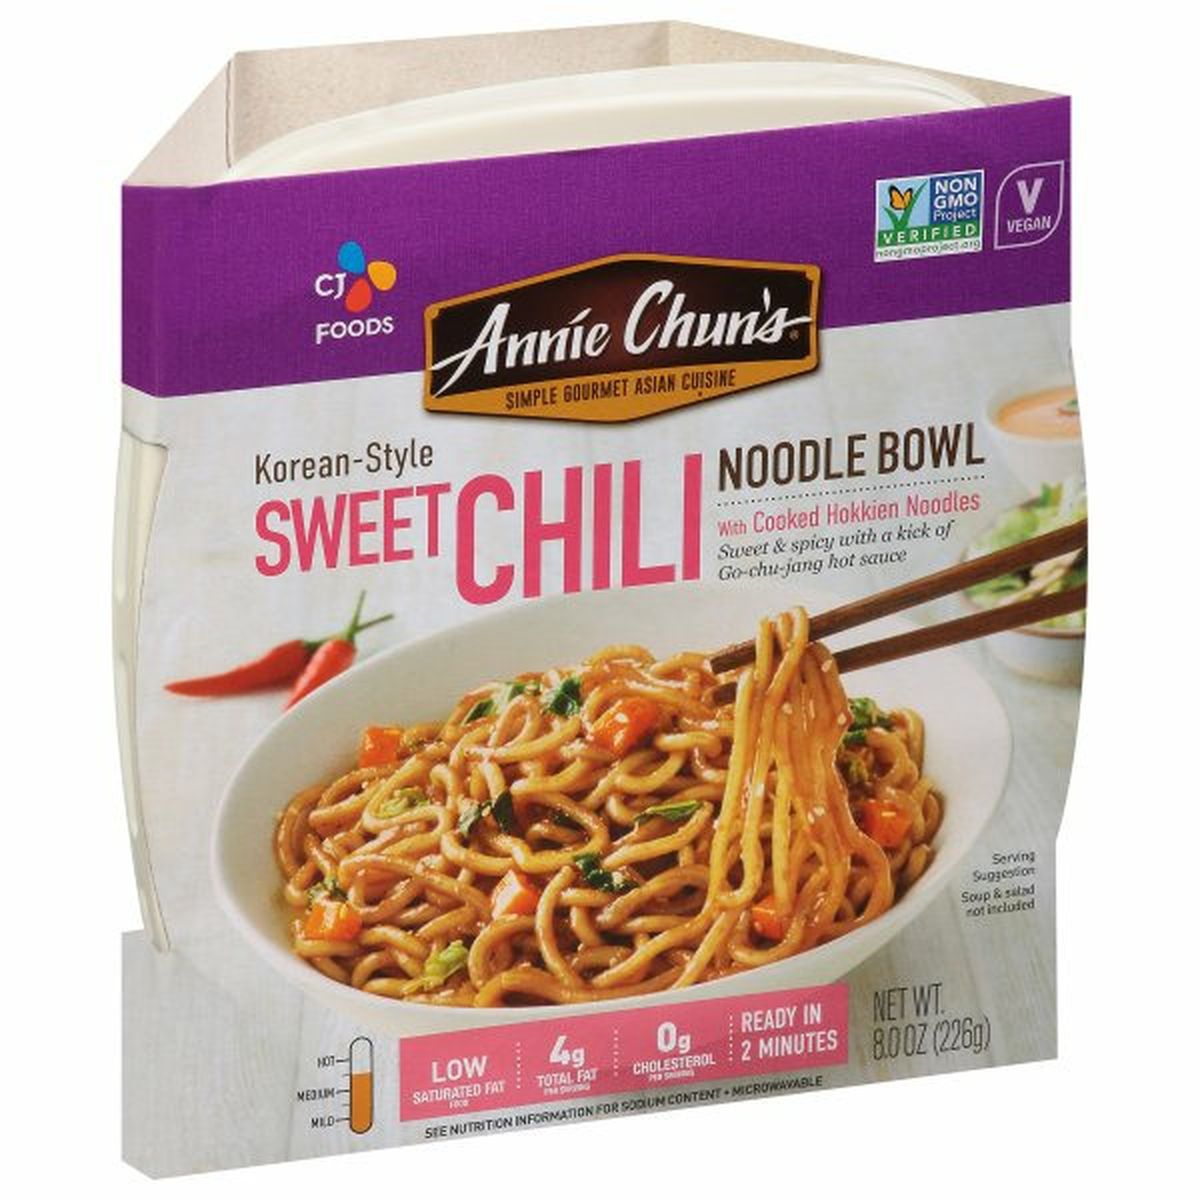 Calories in Annie Chuns Noodle Bowl, Sweet Chili, Korean-Style